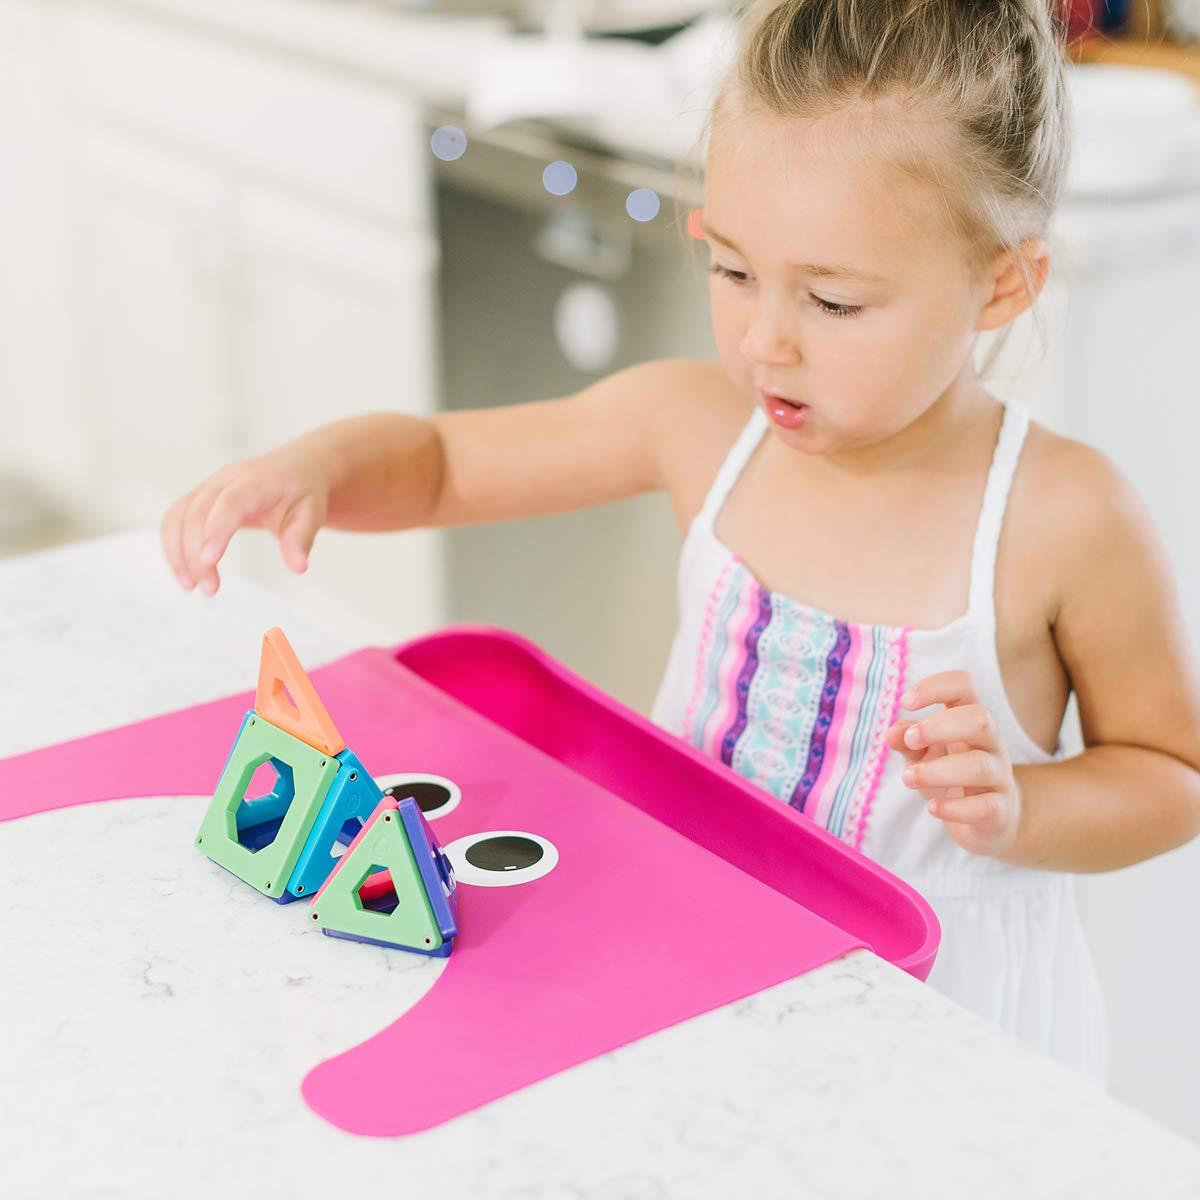 The Cibo Food Catching Baby Placemat with Suction - Wide Mouth